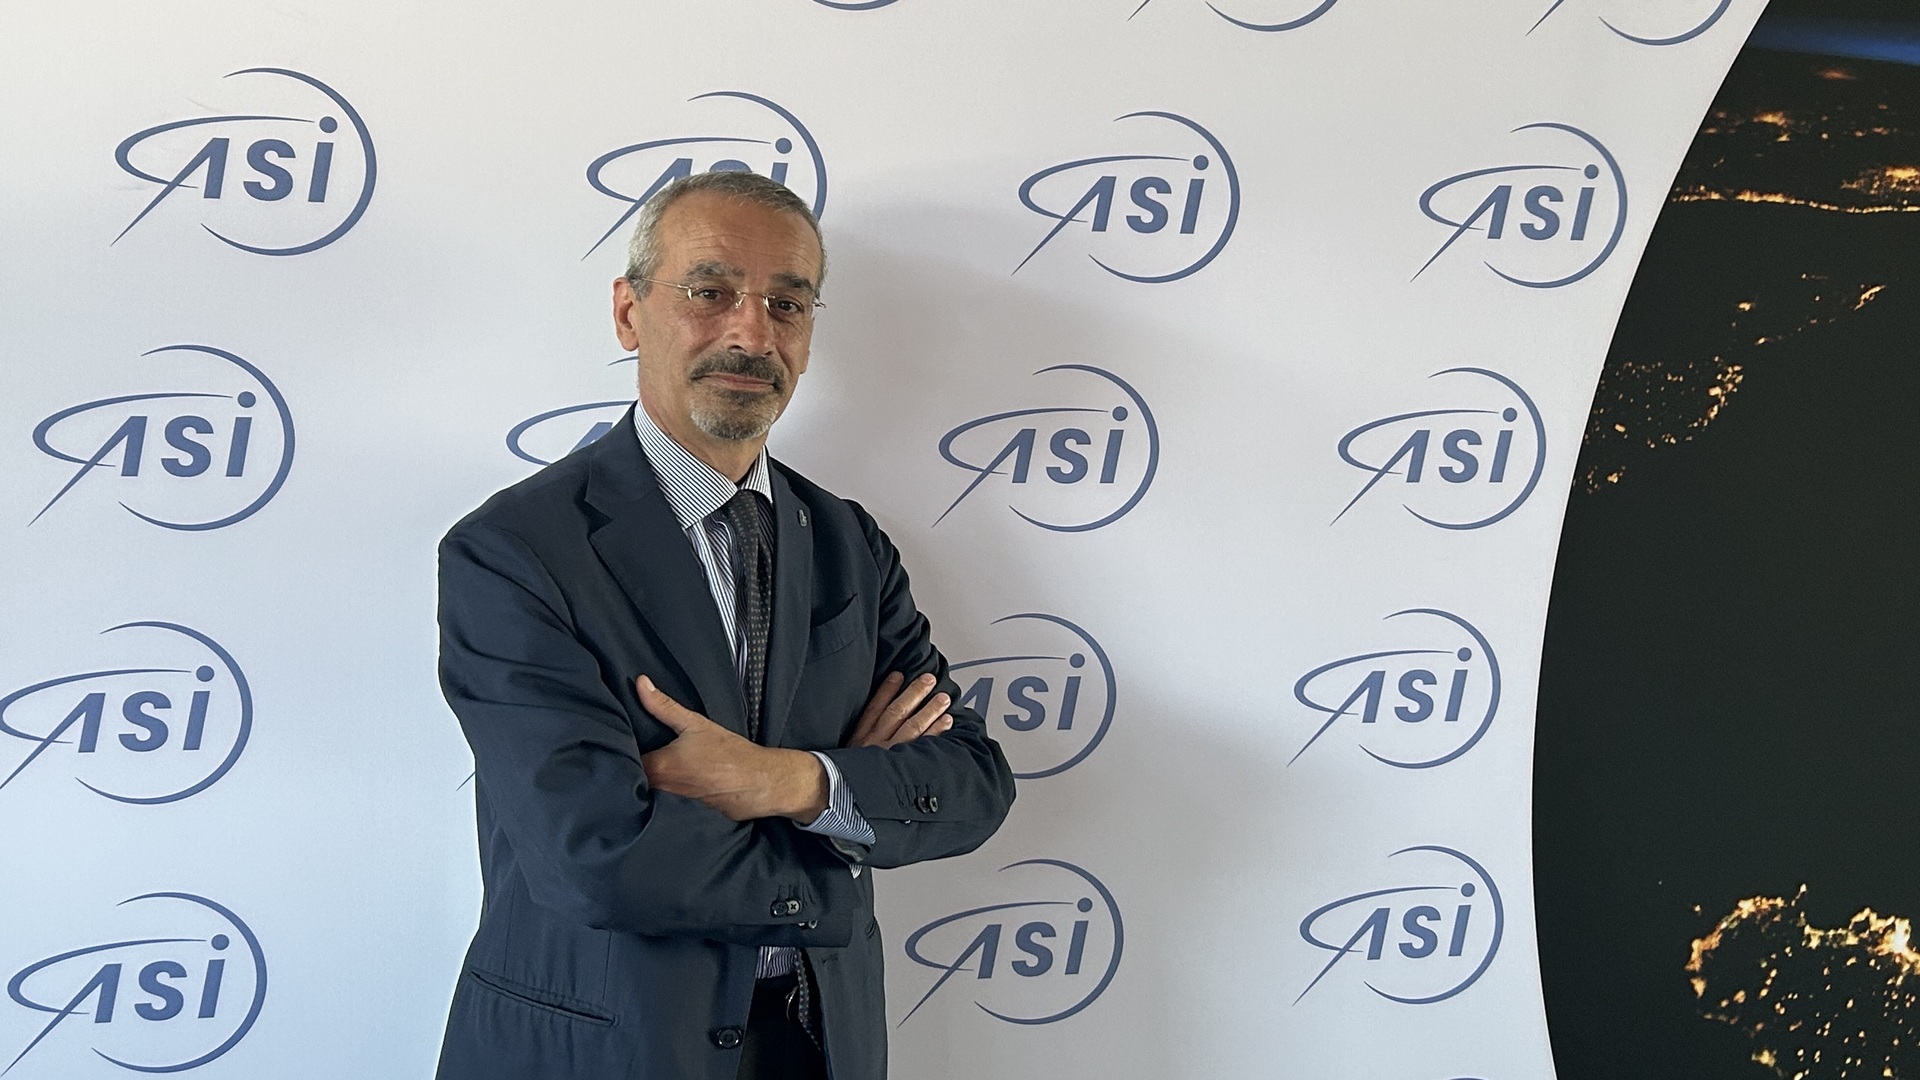 Teodoro Valente is the new president of the Italian Space Agency (ASI)